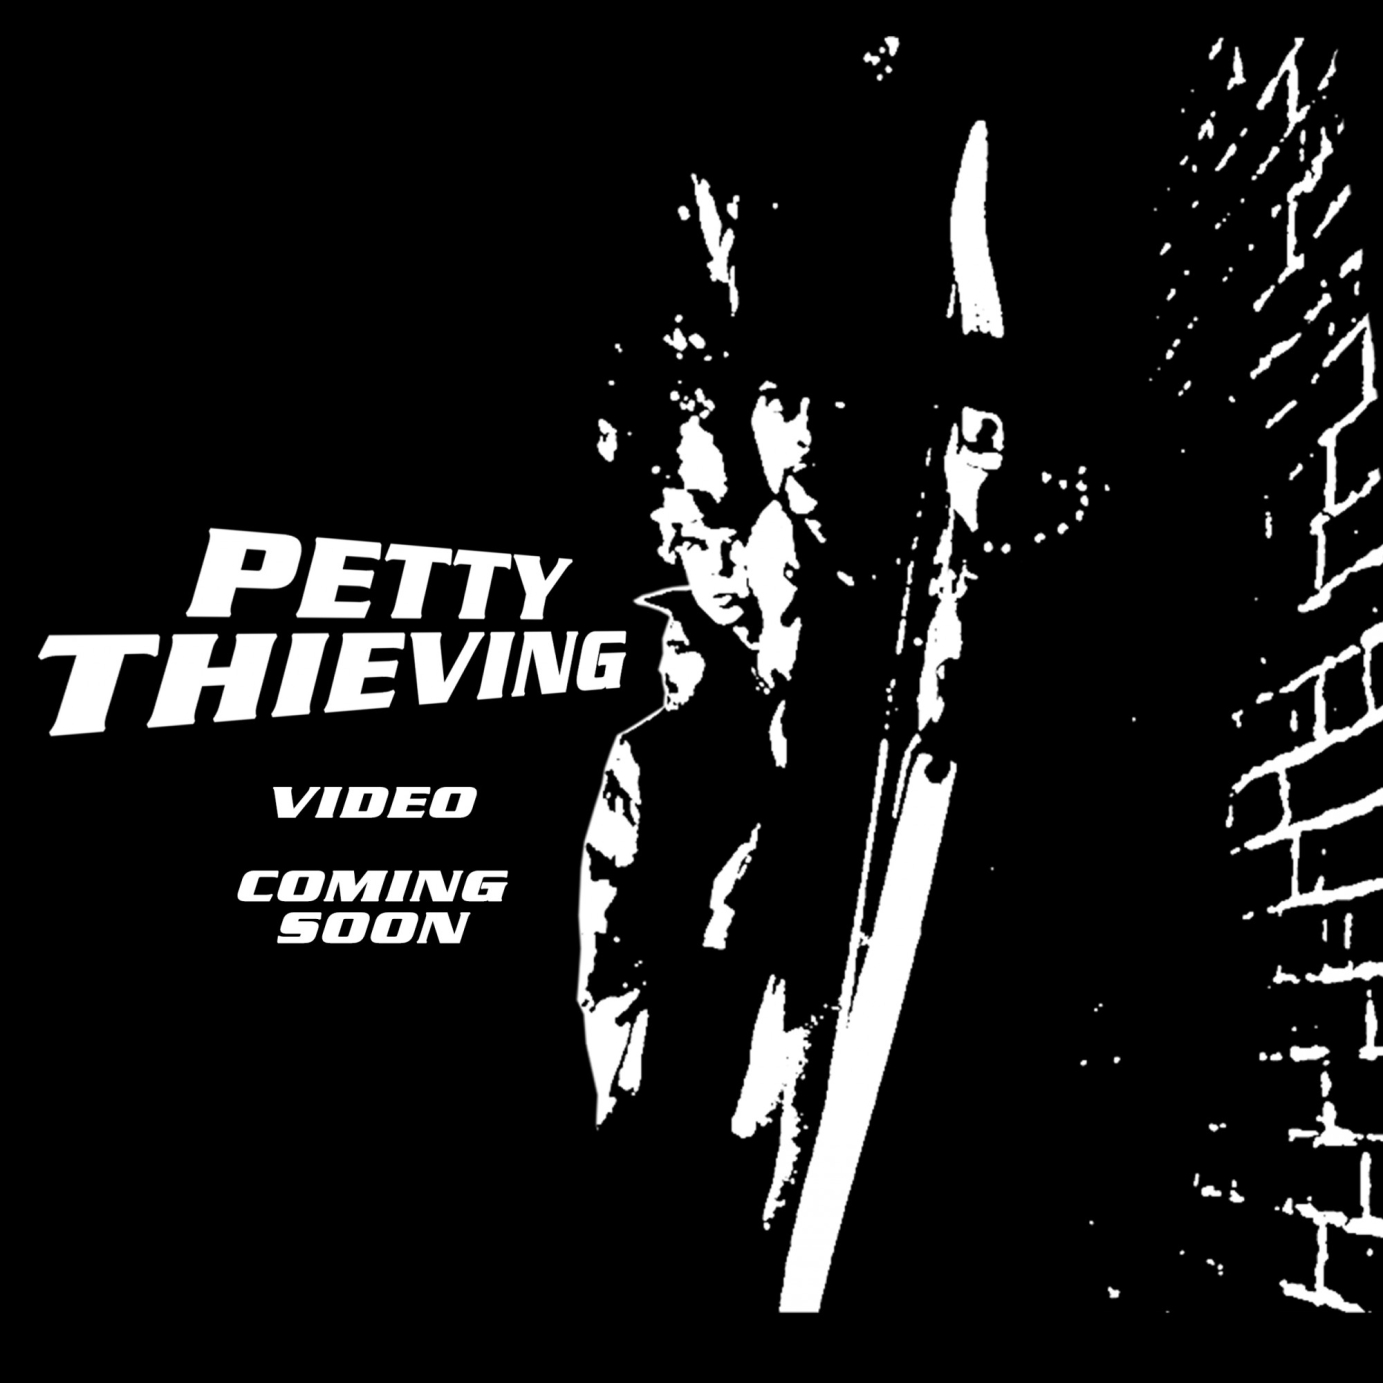 Petty Thieving Cover Art and Art Direction